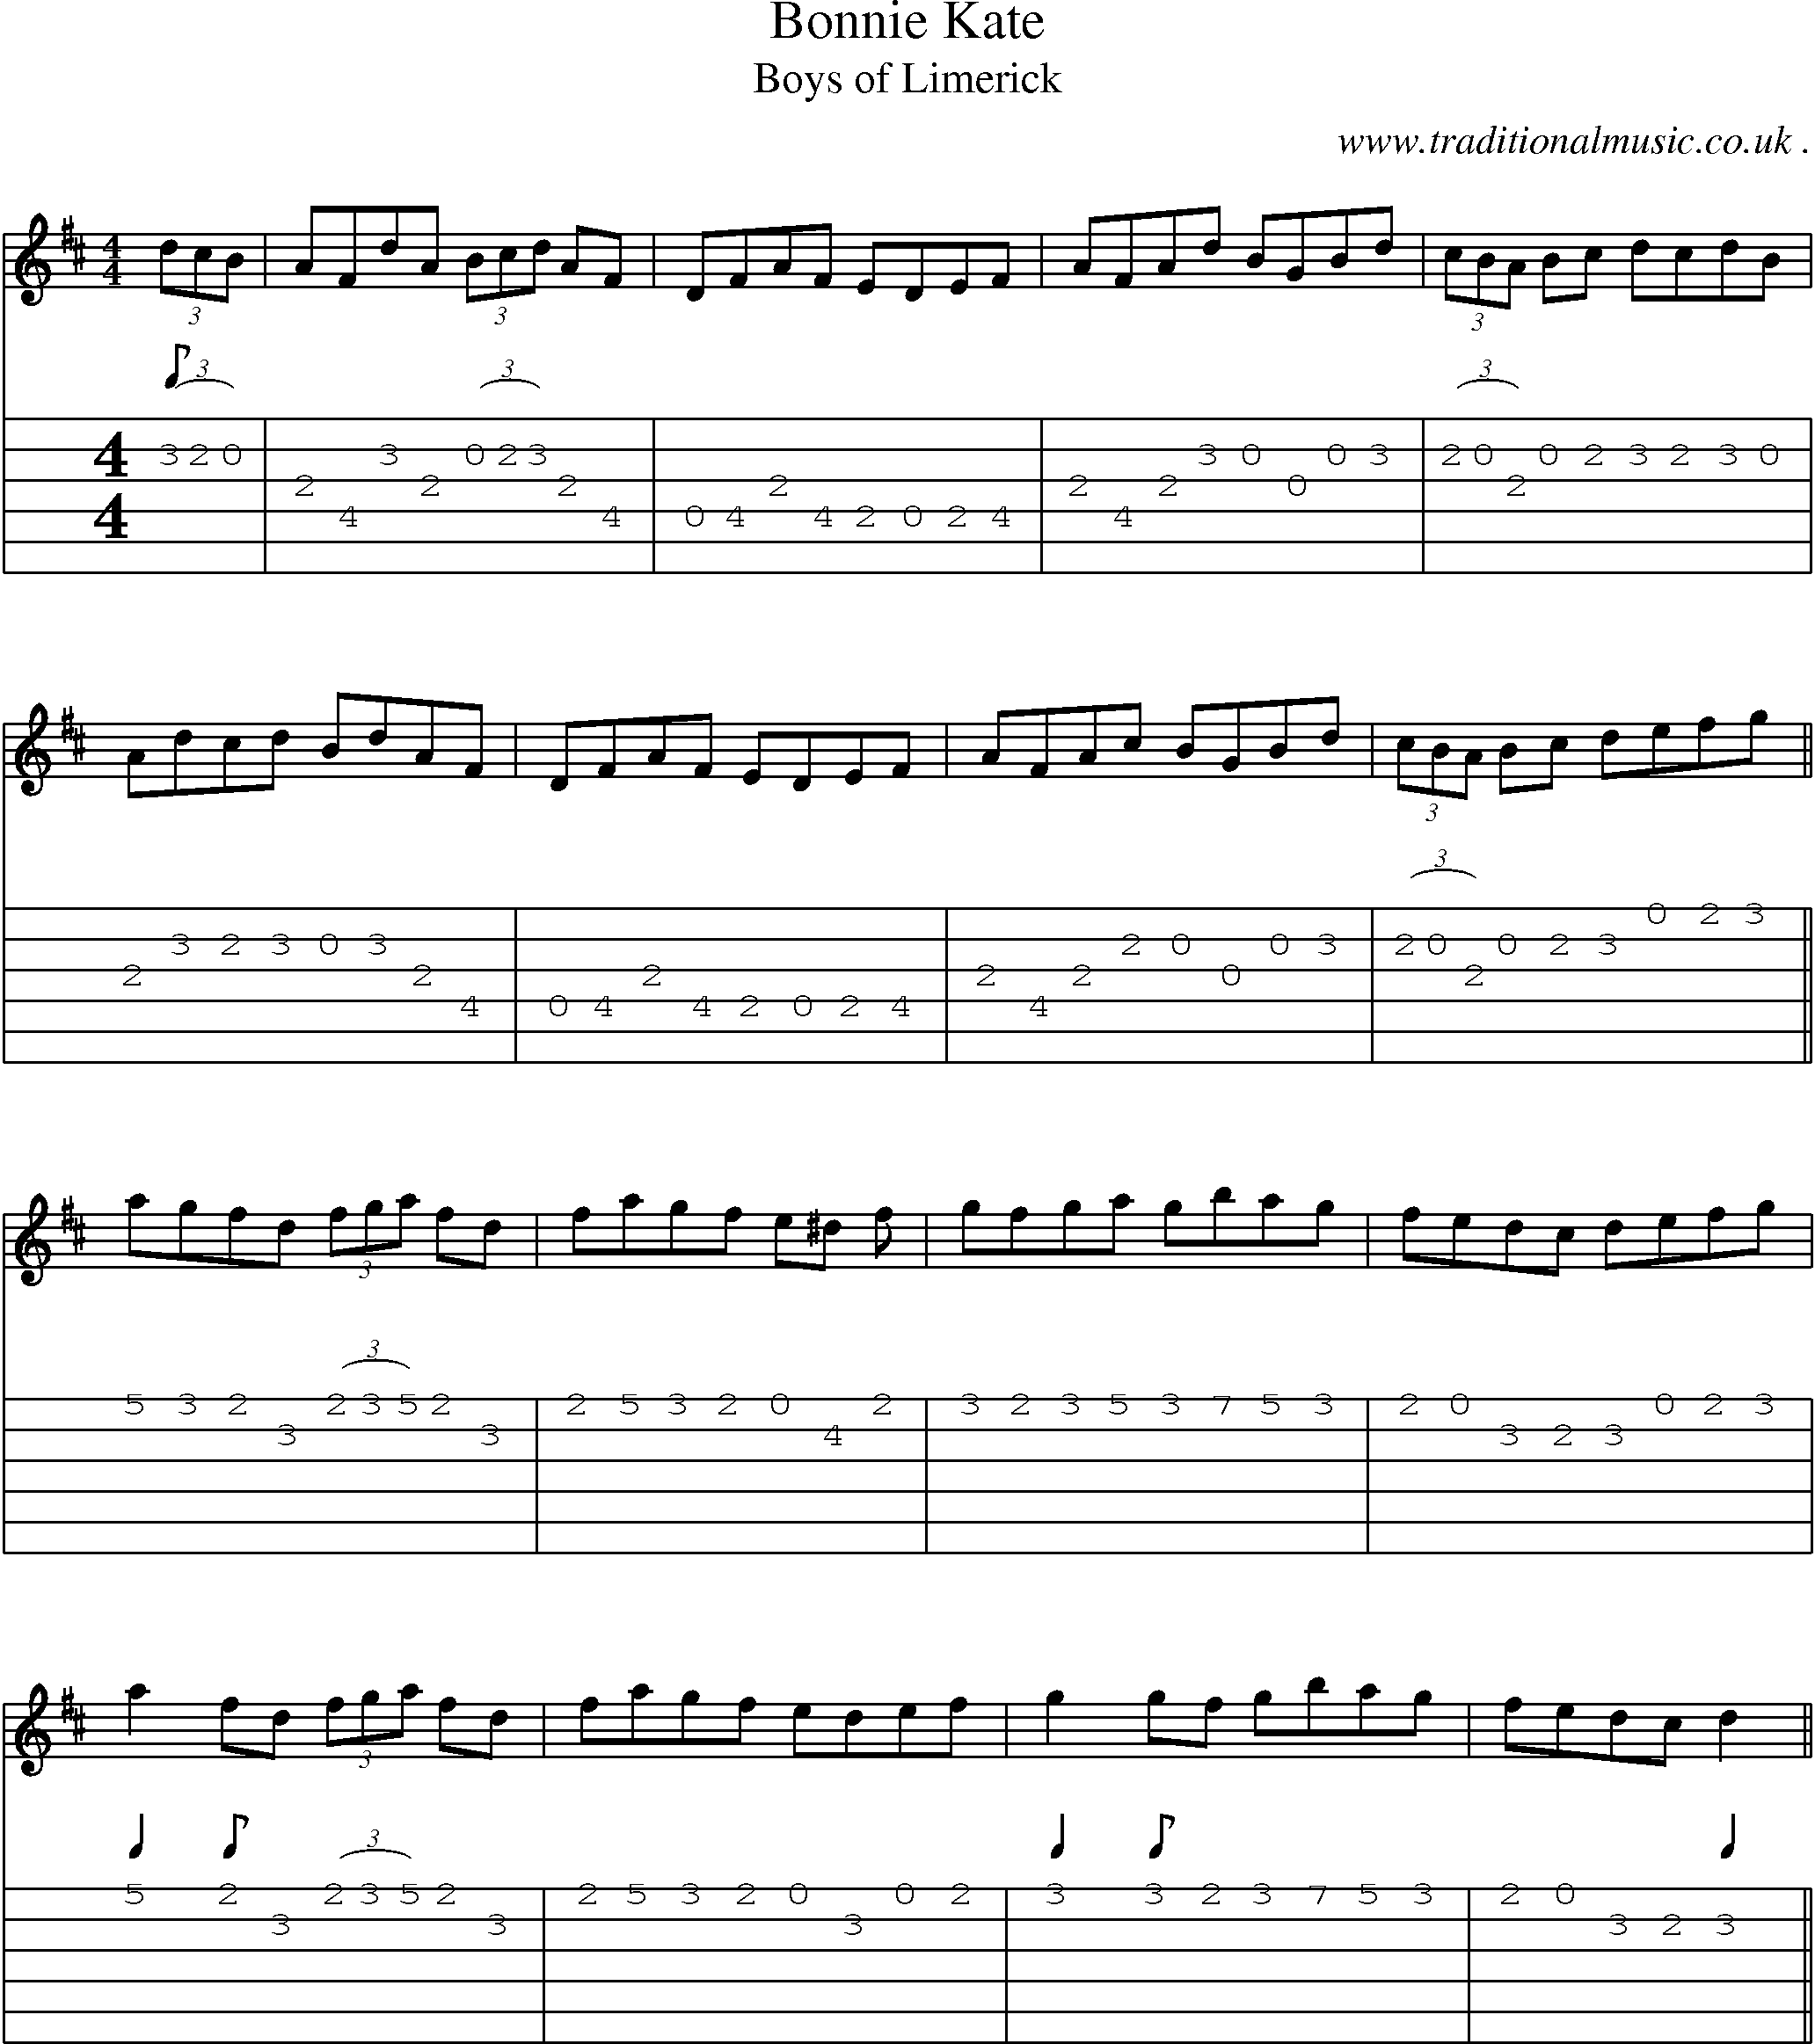 Sheet-music  score, Chords and Guitar Tabs for Bonnie Kate